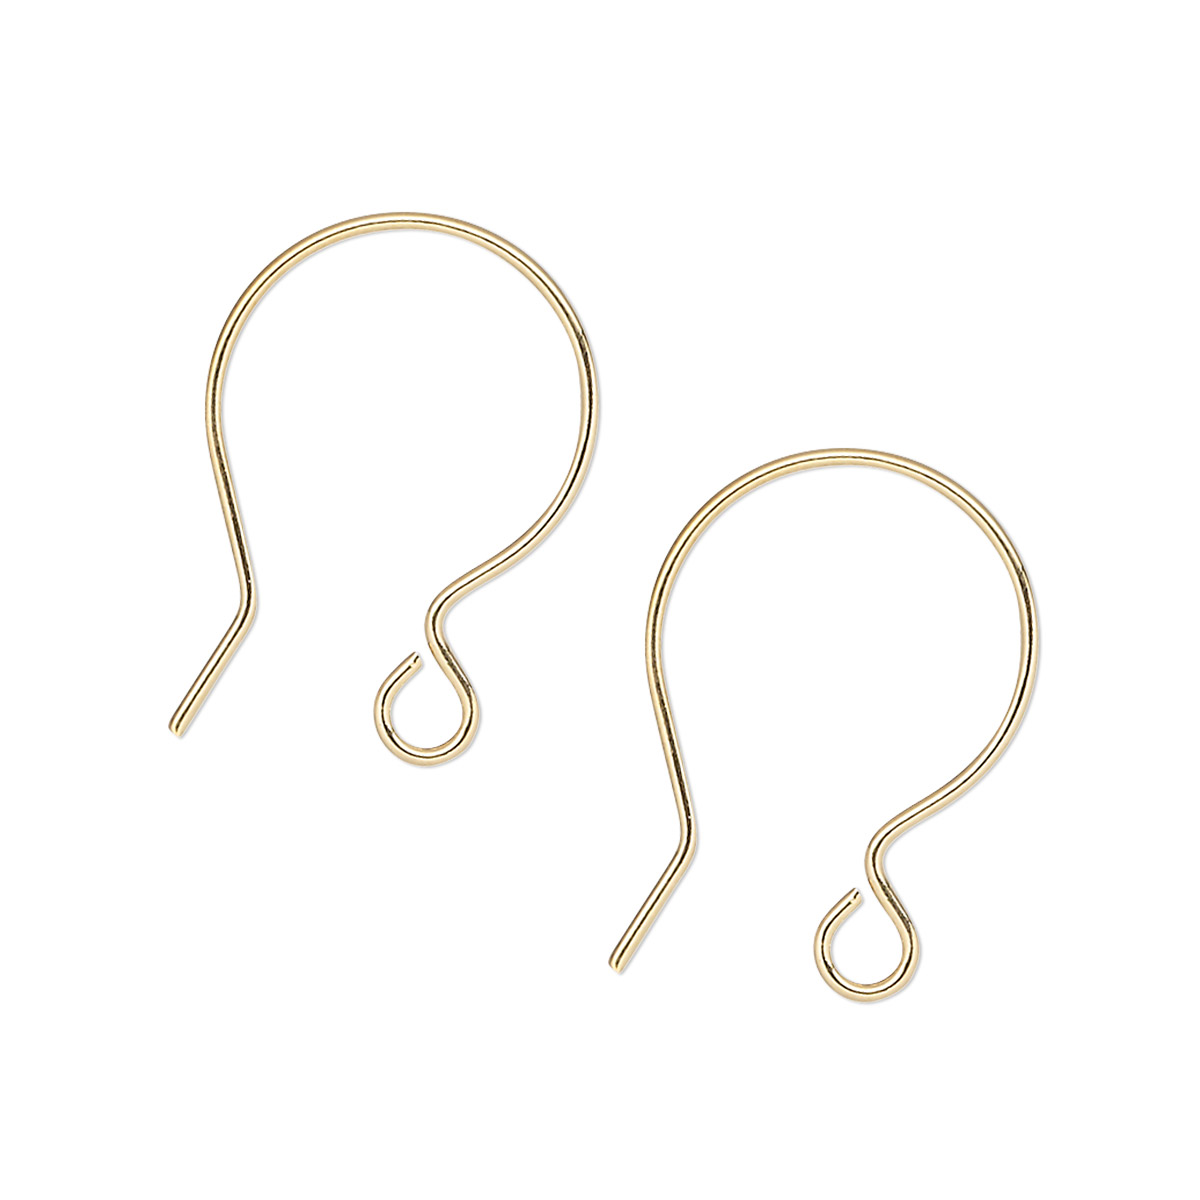 Ear wire, gold-plated brass, 20mm French hook with open loop, 20 gauge ...